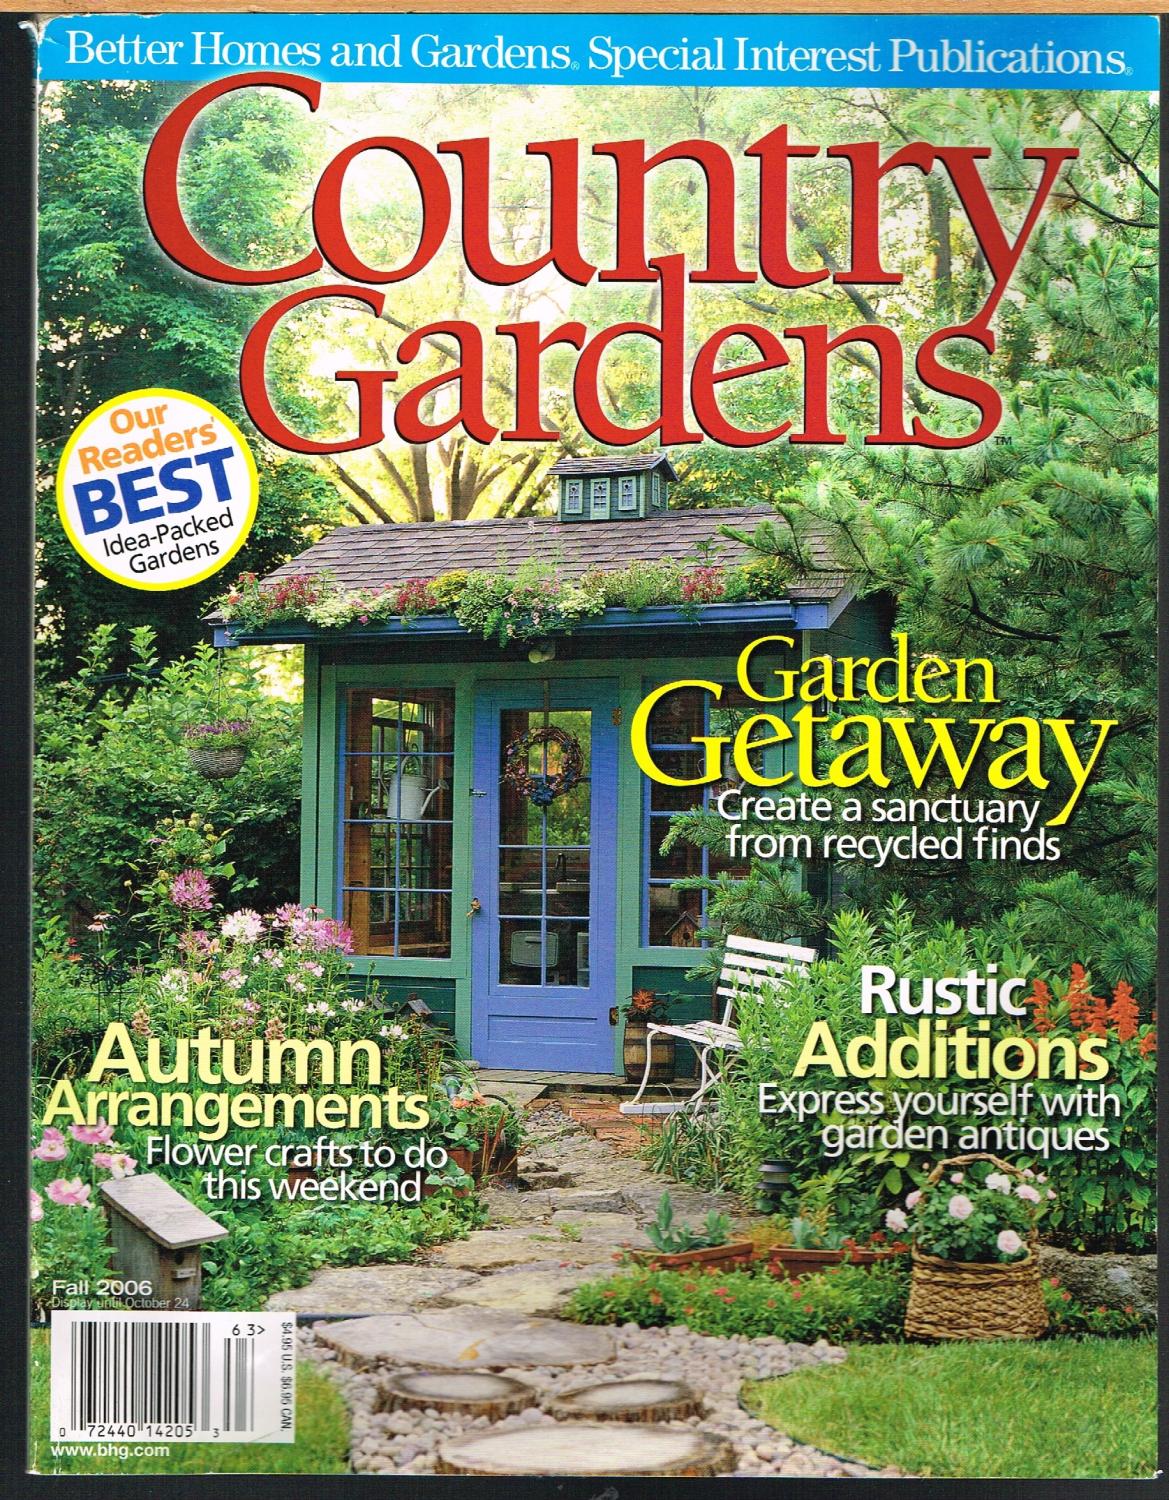 Country Gardens Fall 2006 Vol 15 No 4 Better Homes And